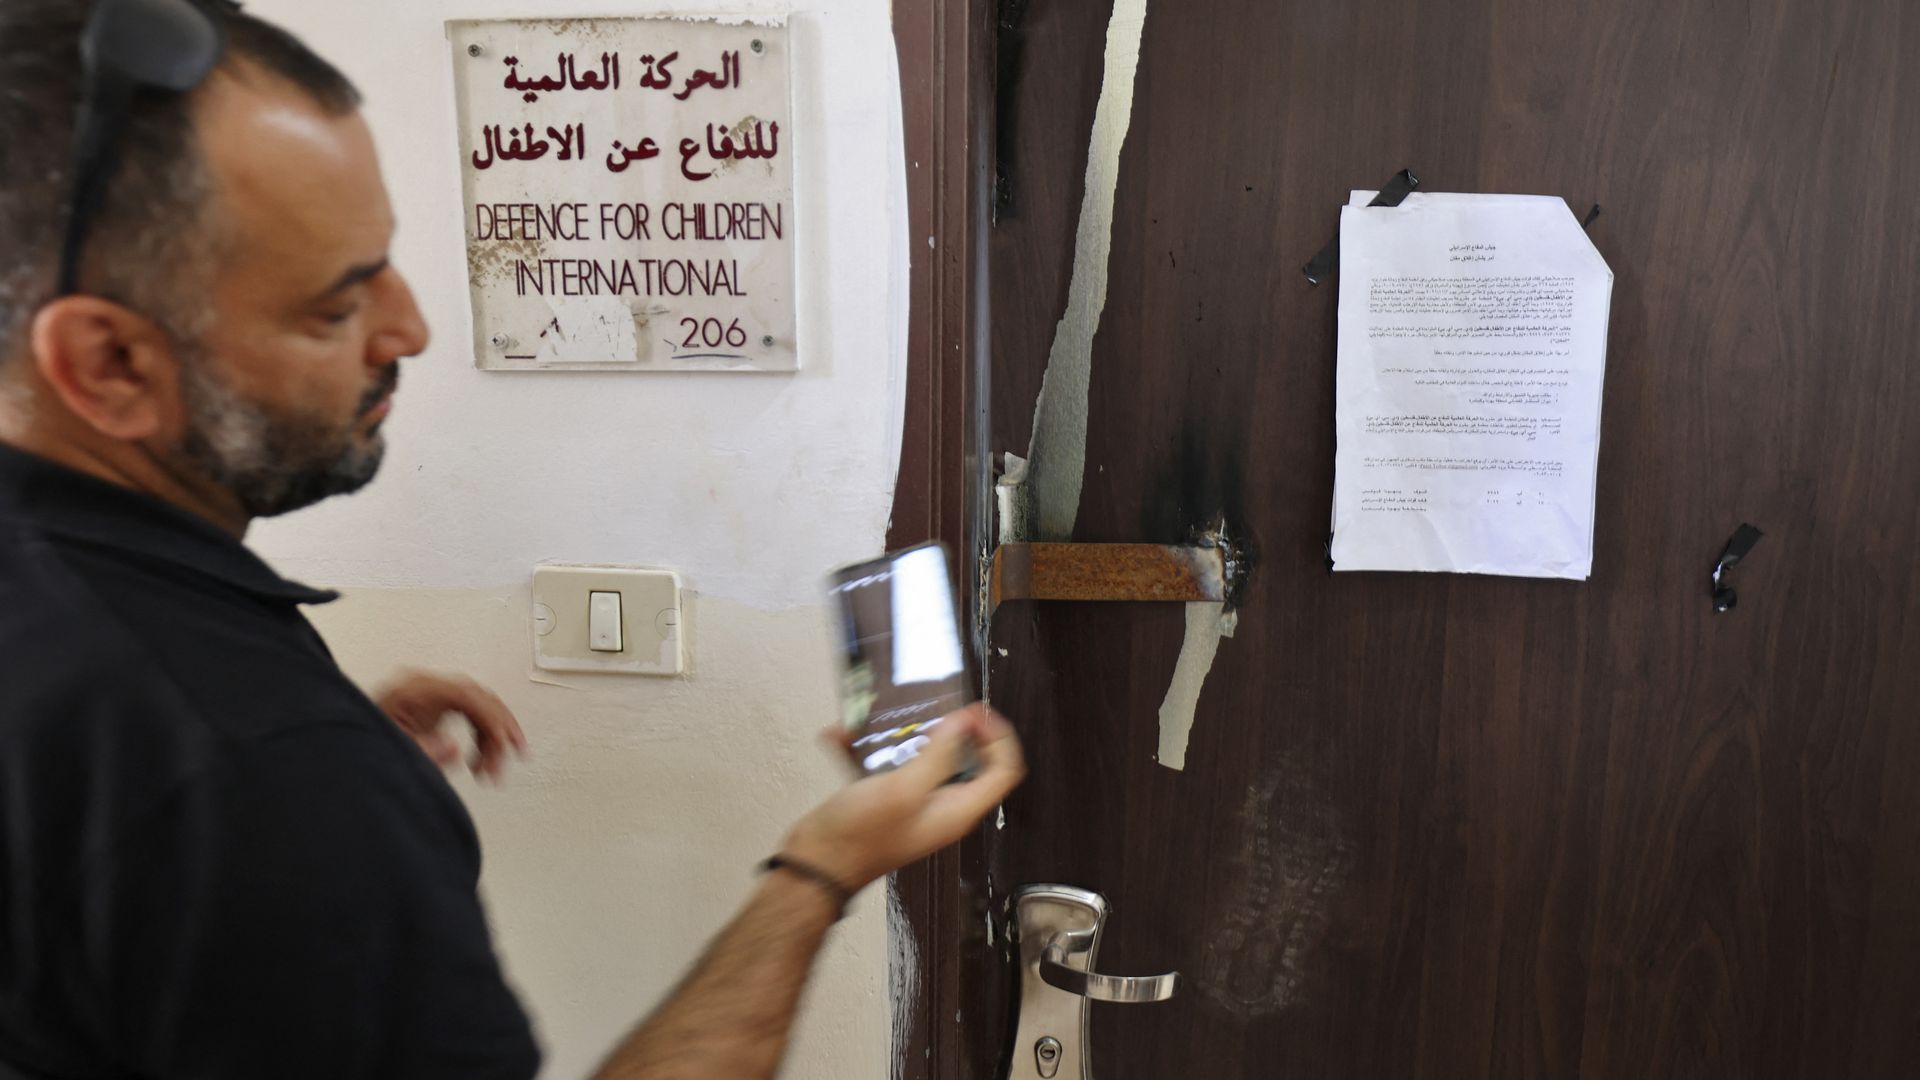 the closed door of Palestinian NGO Defence for Children International after it was raided by Israeli forces in the West Bank city of Ramallah